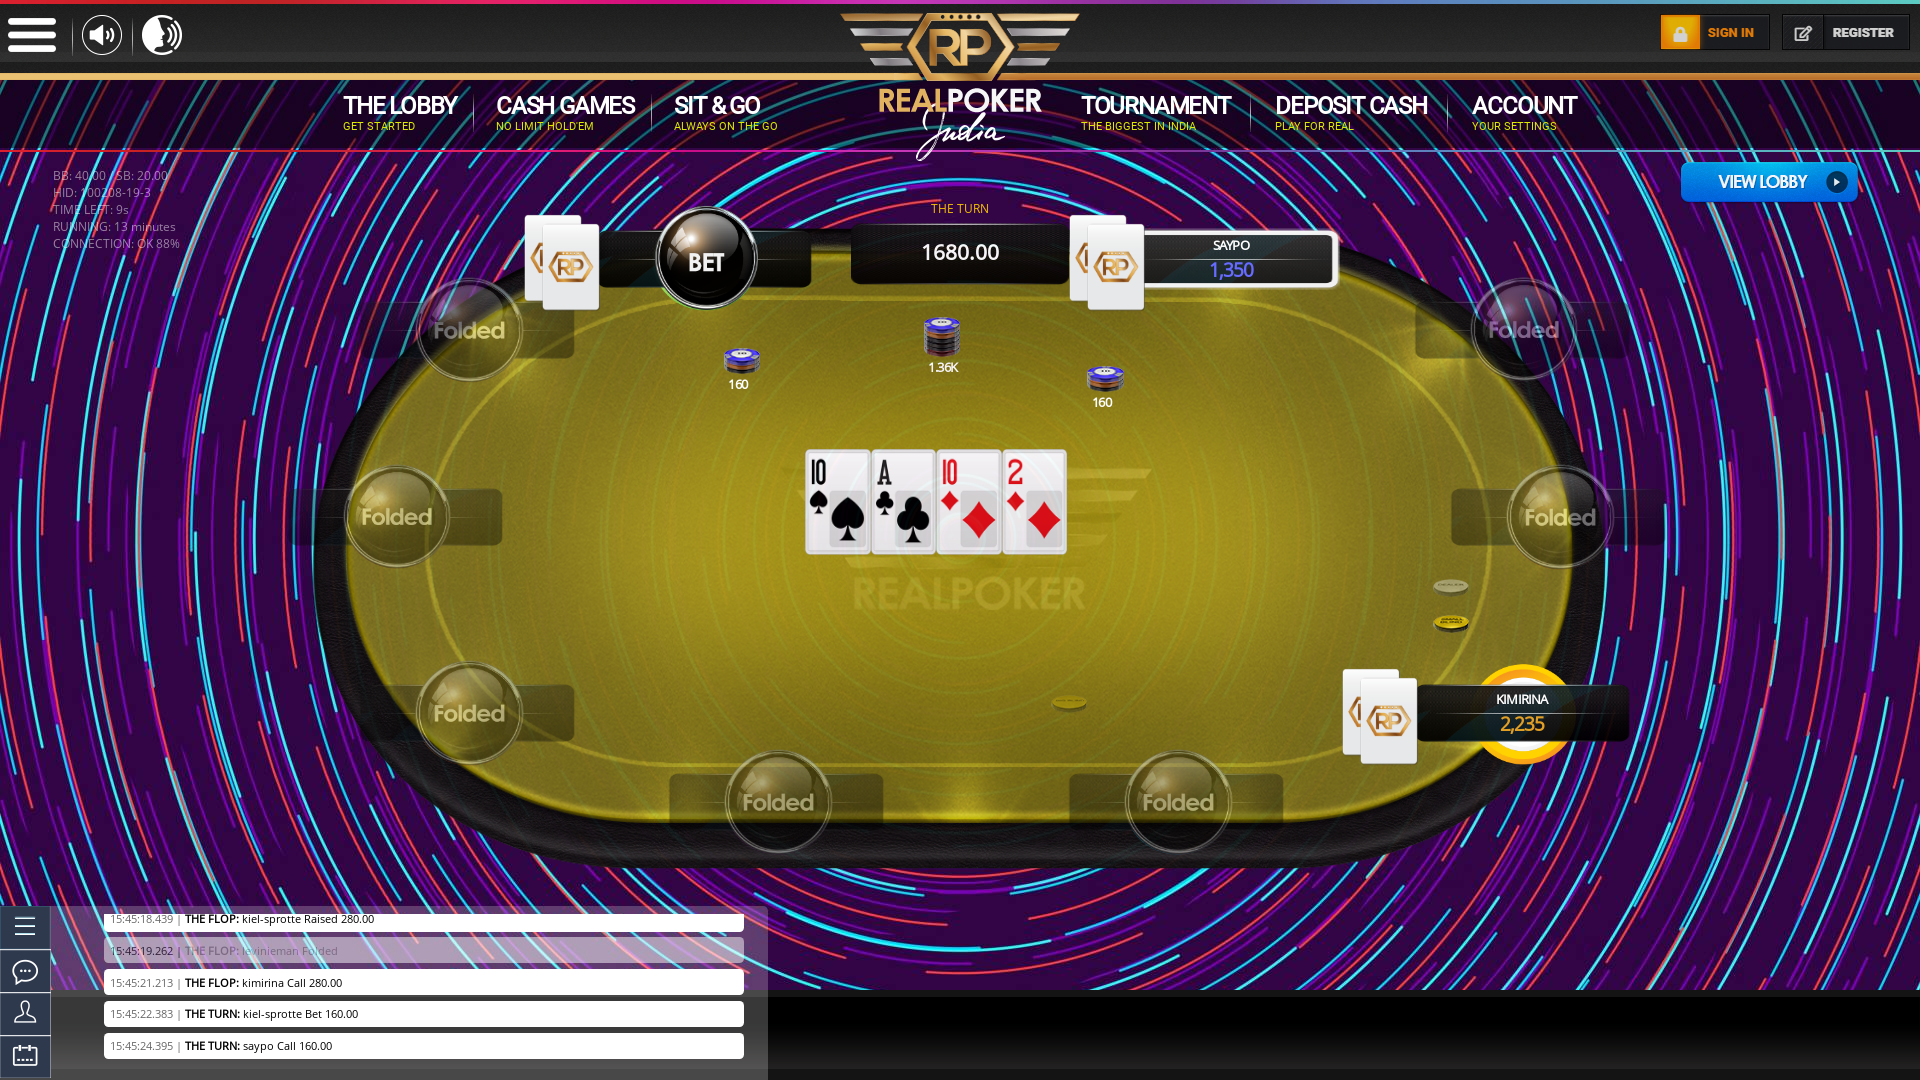 Panjim poker table on a 10 player table in the 13th minute of the match